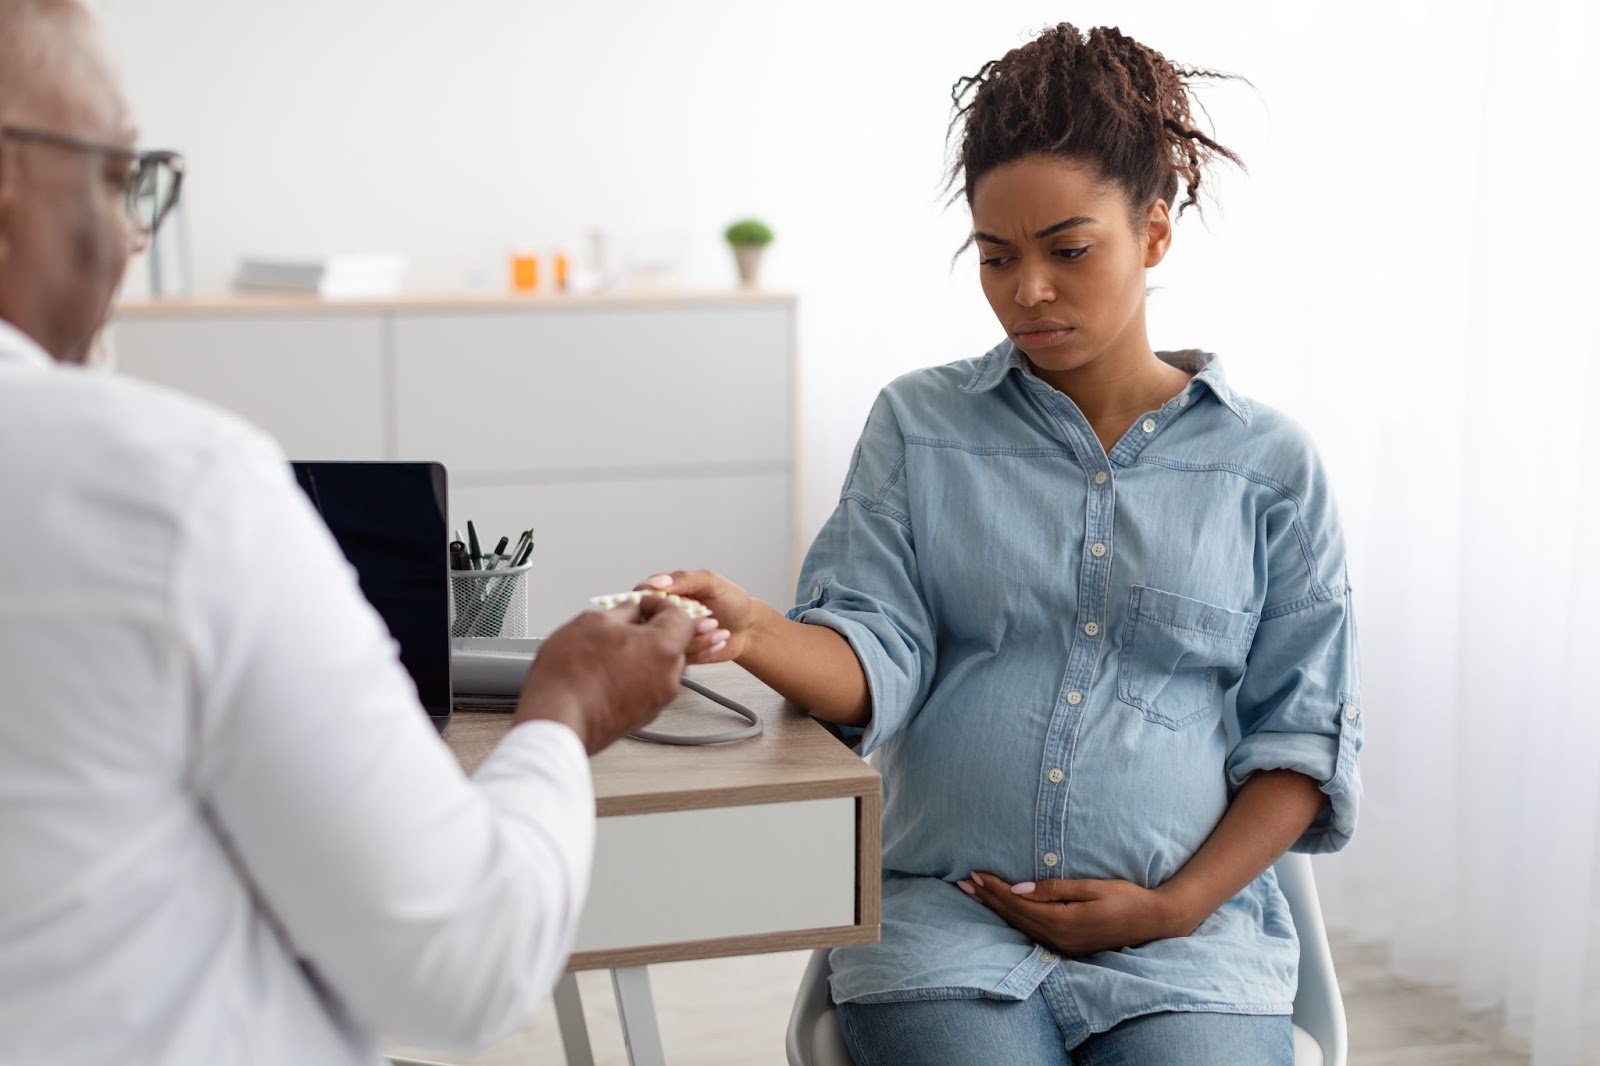 Gestational diabetes can be a significant challenge for up to 10% of pregnancies, but you don't have to go through it alone!